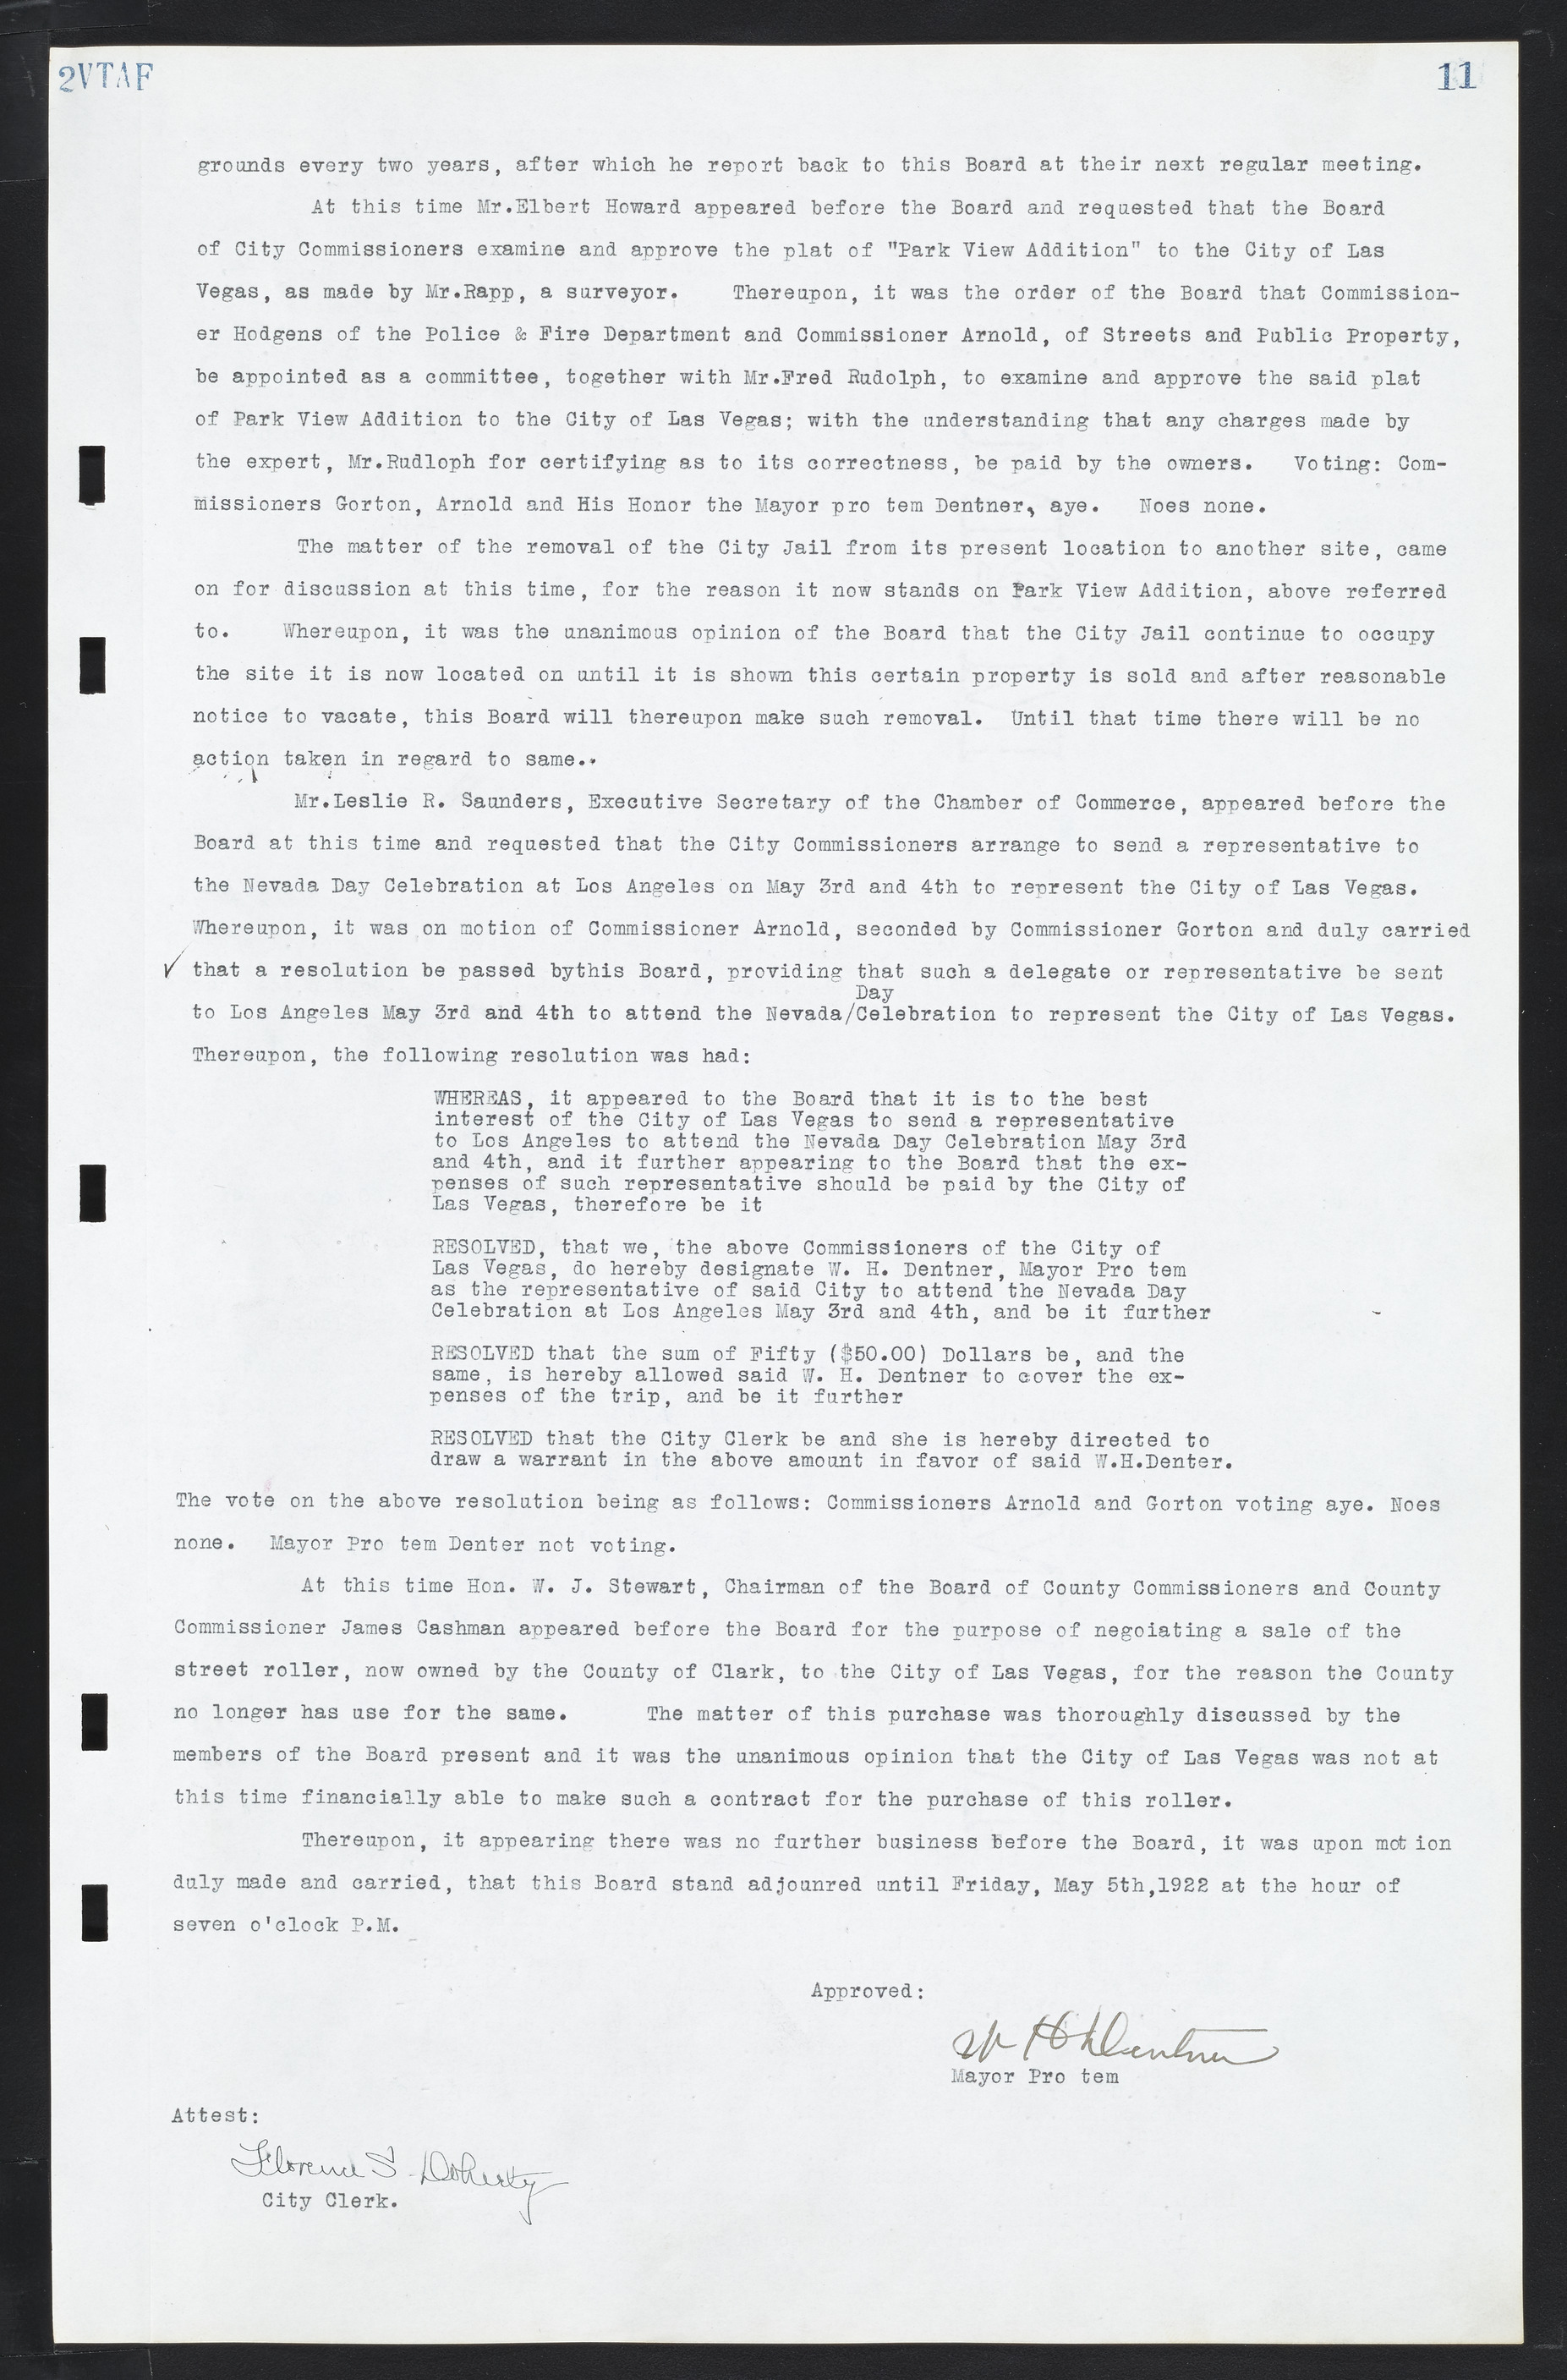 Las Vegas City Commission Minutes, March 1, 1922 to May 10, 1929, lvc000002-18